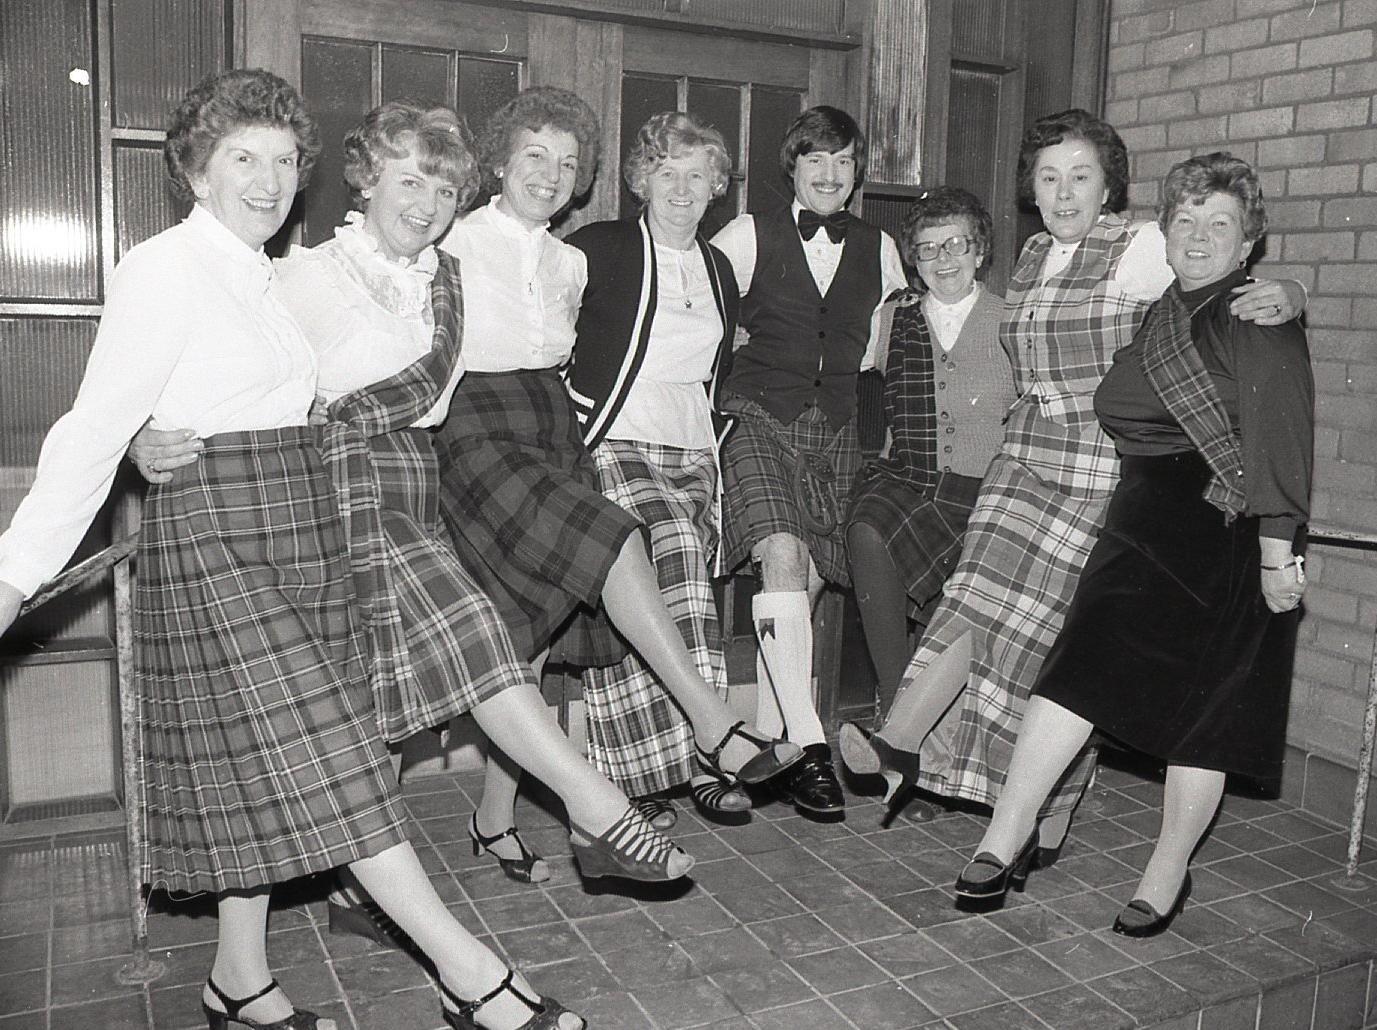 Following previous Hawaiin and French 'nights out' the members of Preston Widows Association donned the tartan for a night out with a Scottish flavour at the Derby School social centre in Preston. Picture shows accordionist Geoff Stuart having a fling with the ladies (left to right) Stella Guest, Yvonne Howarth, Georgette Hodgett, Dolly Boucher, Peggy Gillibrand, Brenda Lucas and Joan Fearns